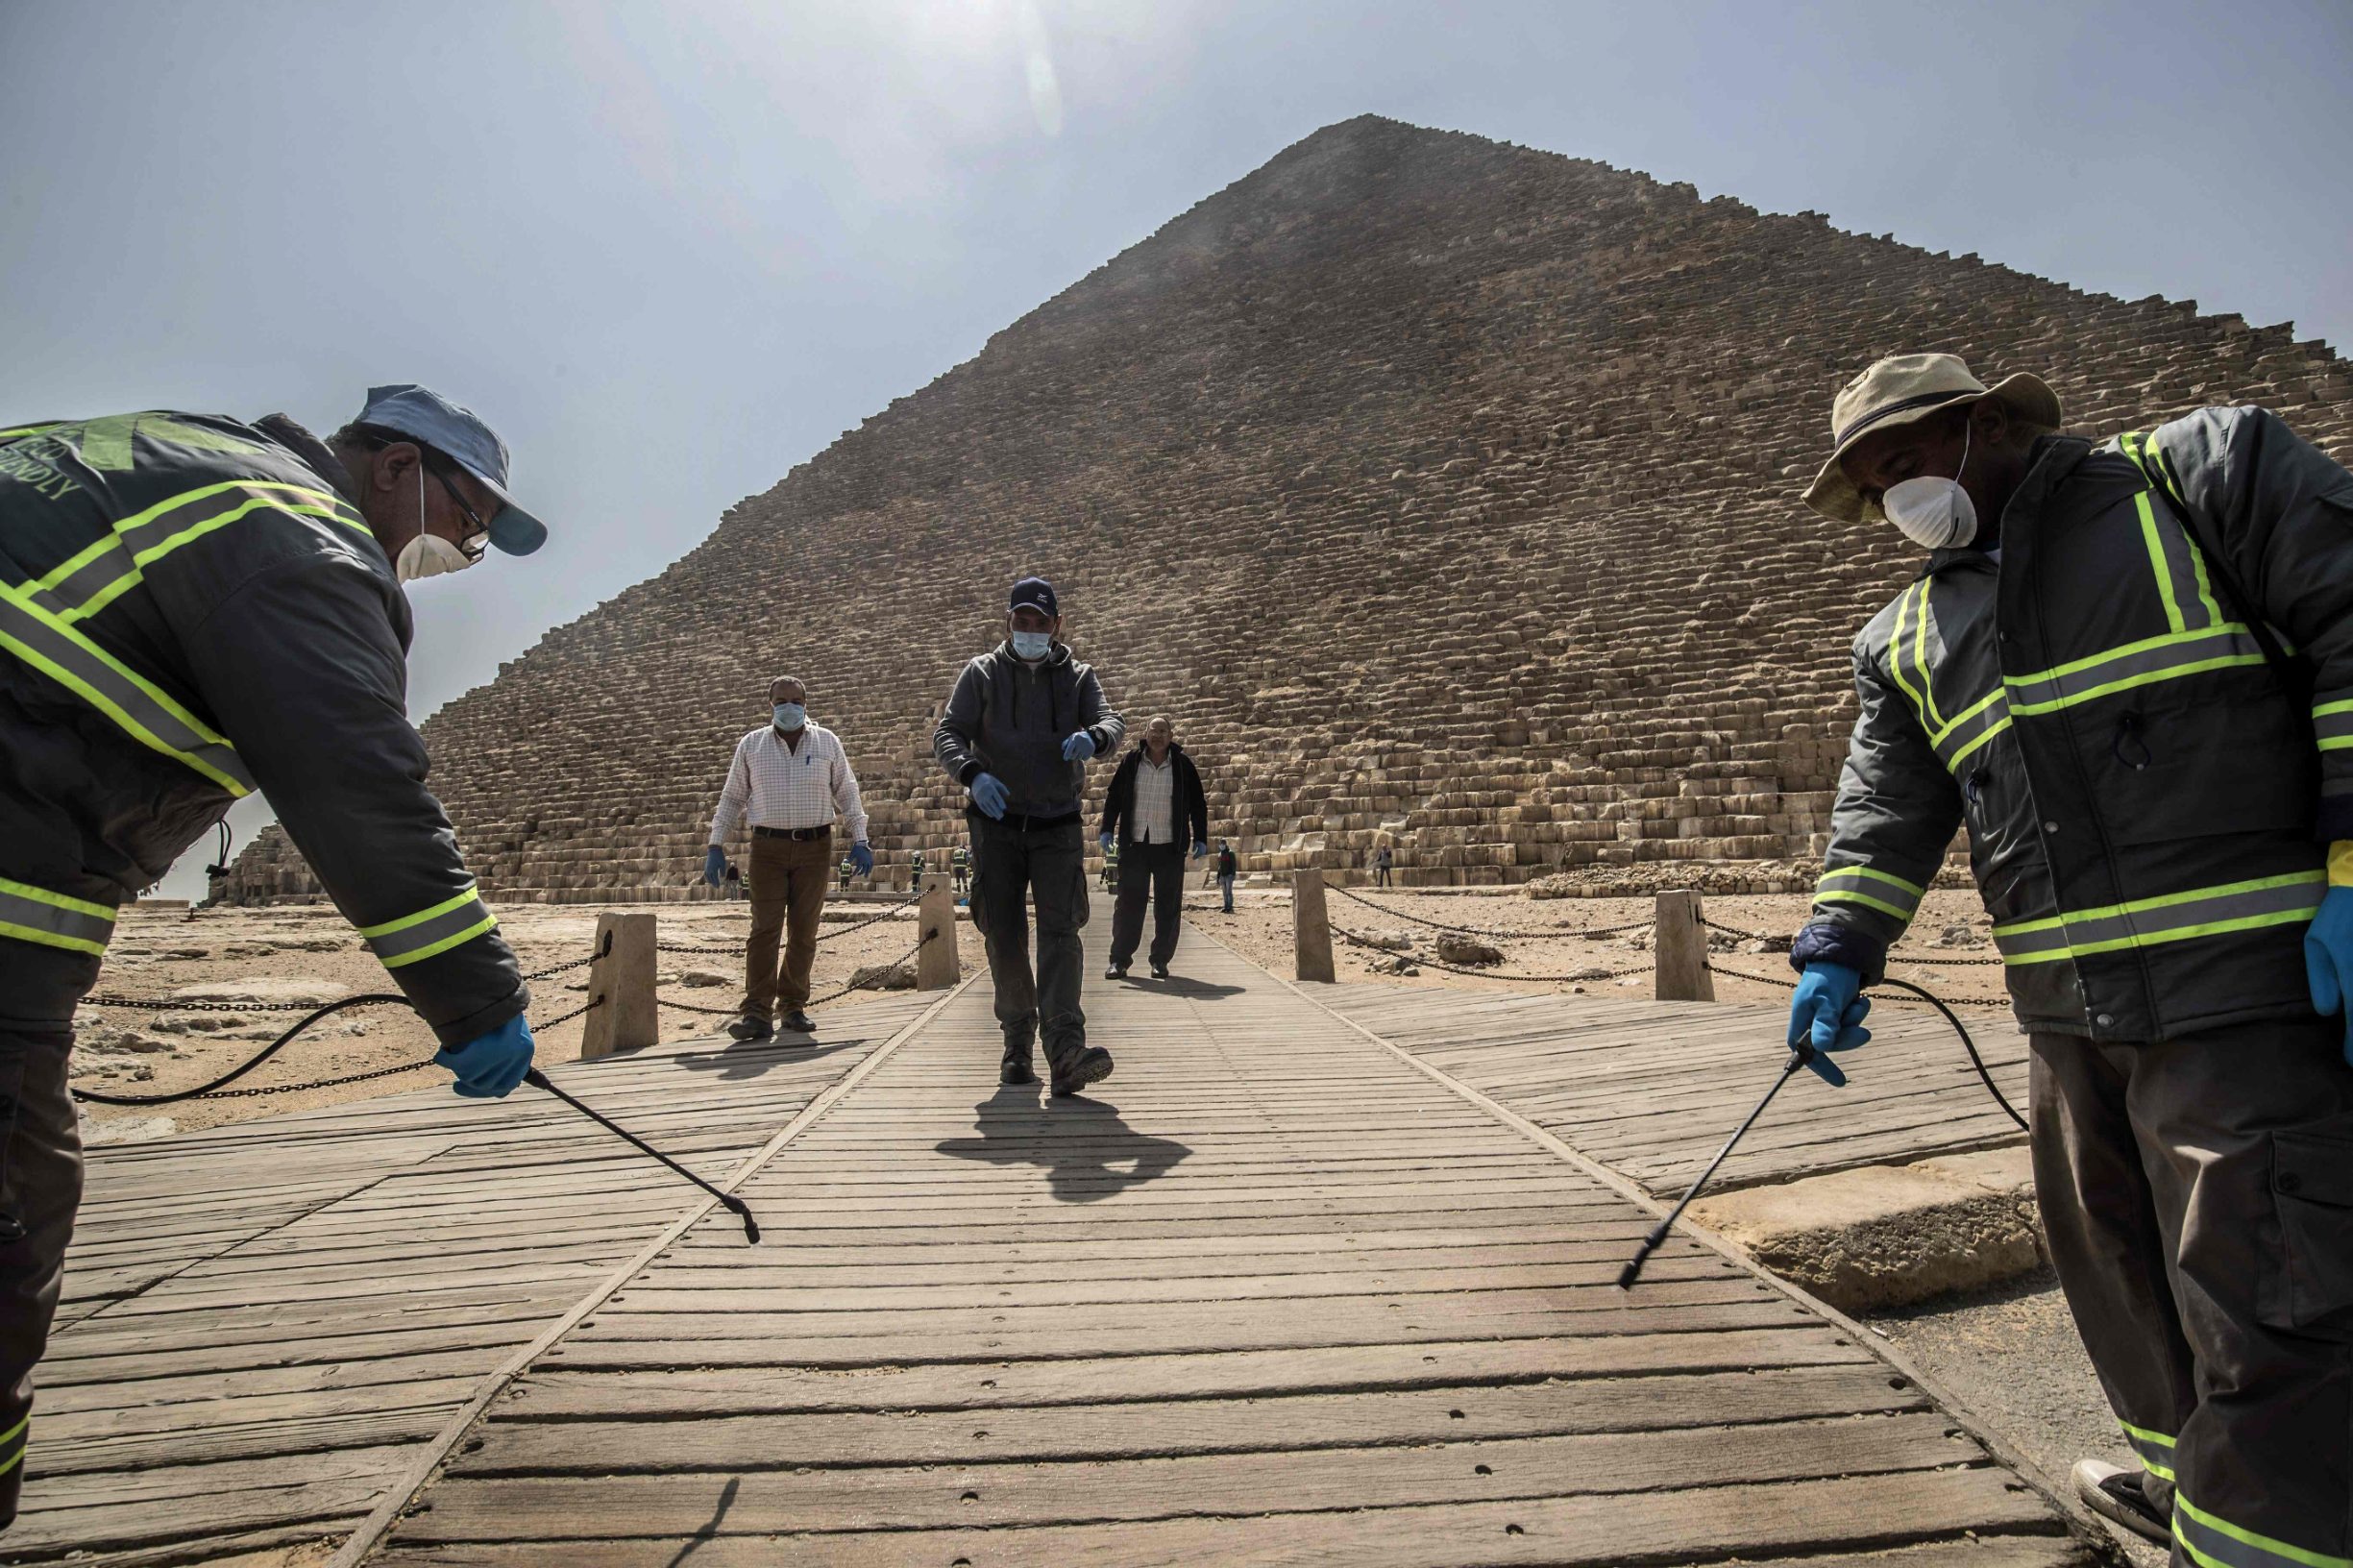 TOPSHOT - Egyptian municipality workers disinfect the Giza pyramids necropolis on the southwestern outskirts of the Egyptian capital Cairo on March 25, 2020 as protective a measure against the spread of the coronavirus COVID-19. (Photo by Khaled DESOUKI / AFP)